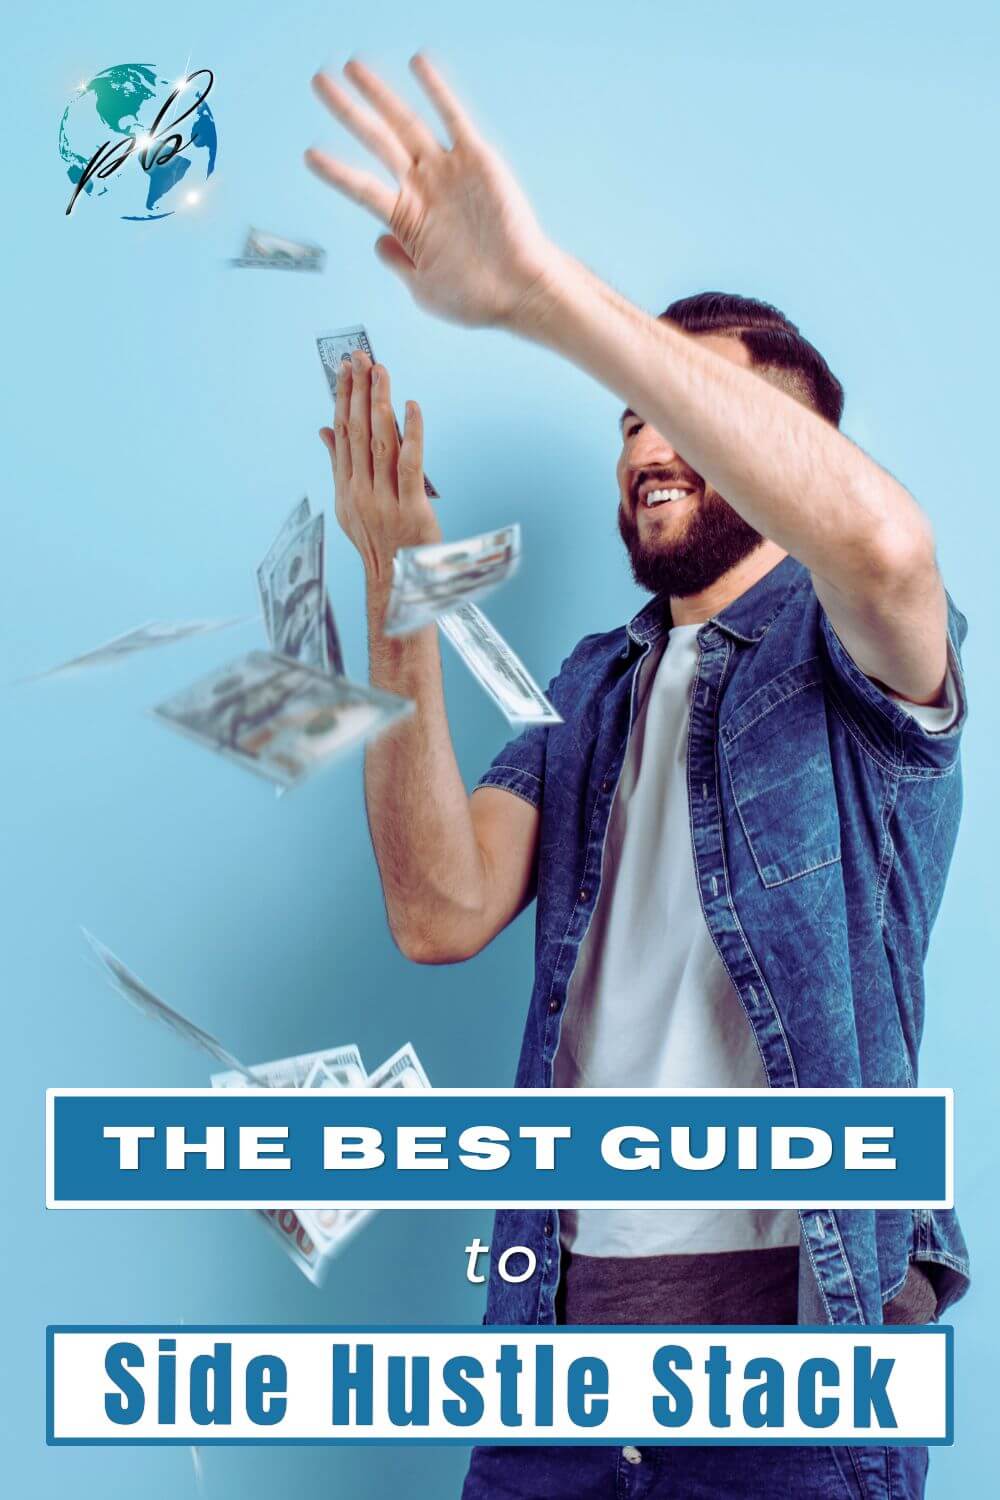 The best guide to side hustle stack 6